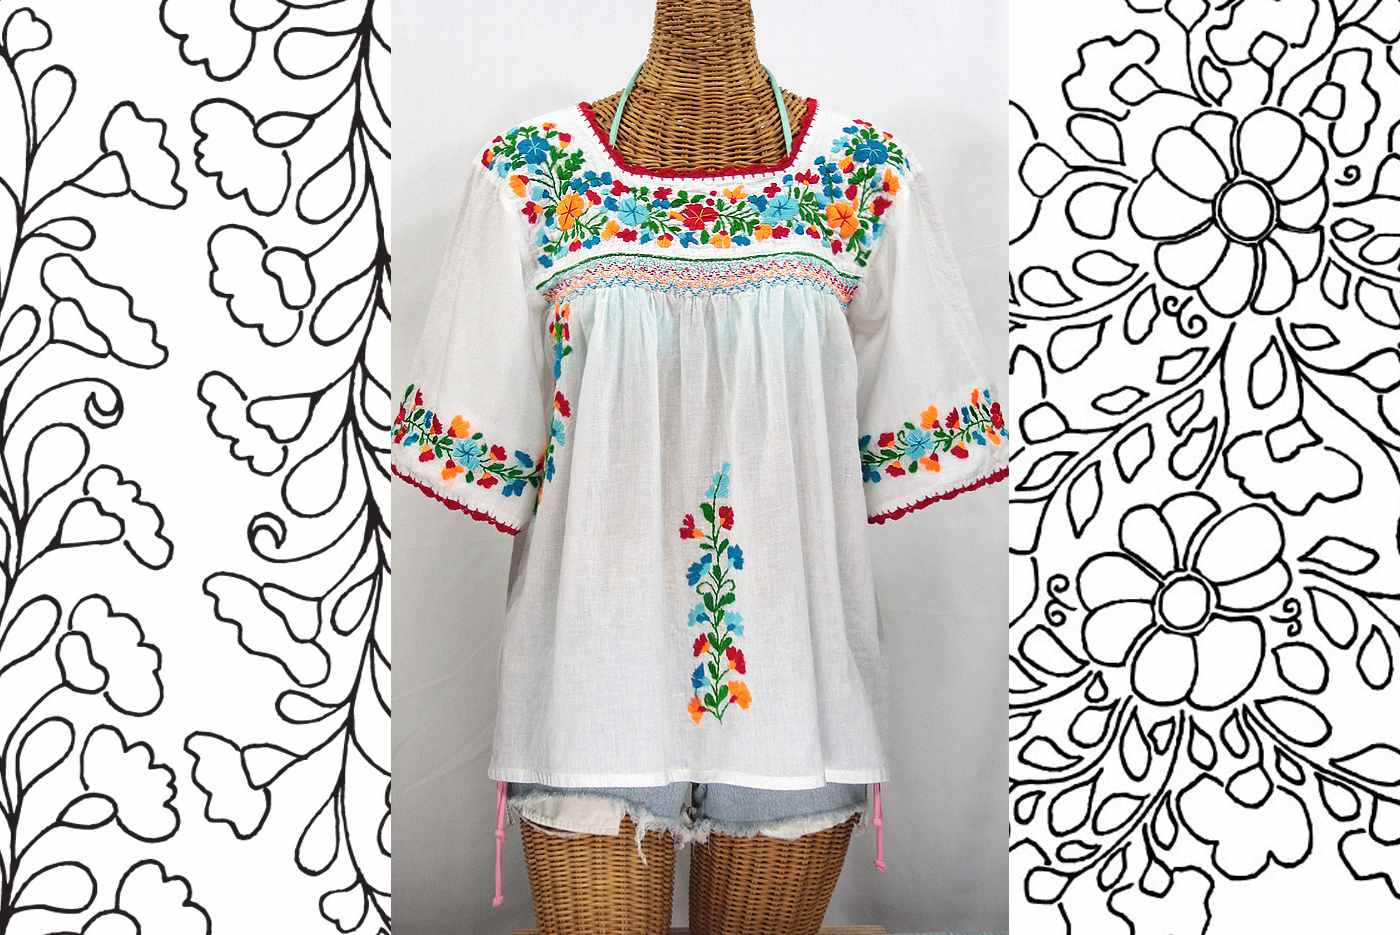 Mexican Embroidery Pattern Ethnic And Multicultural Embroidery Patterns